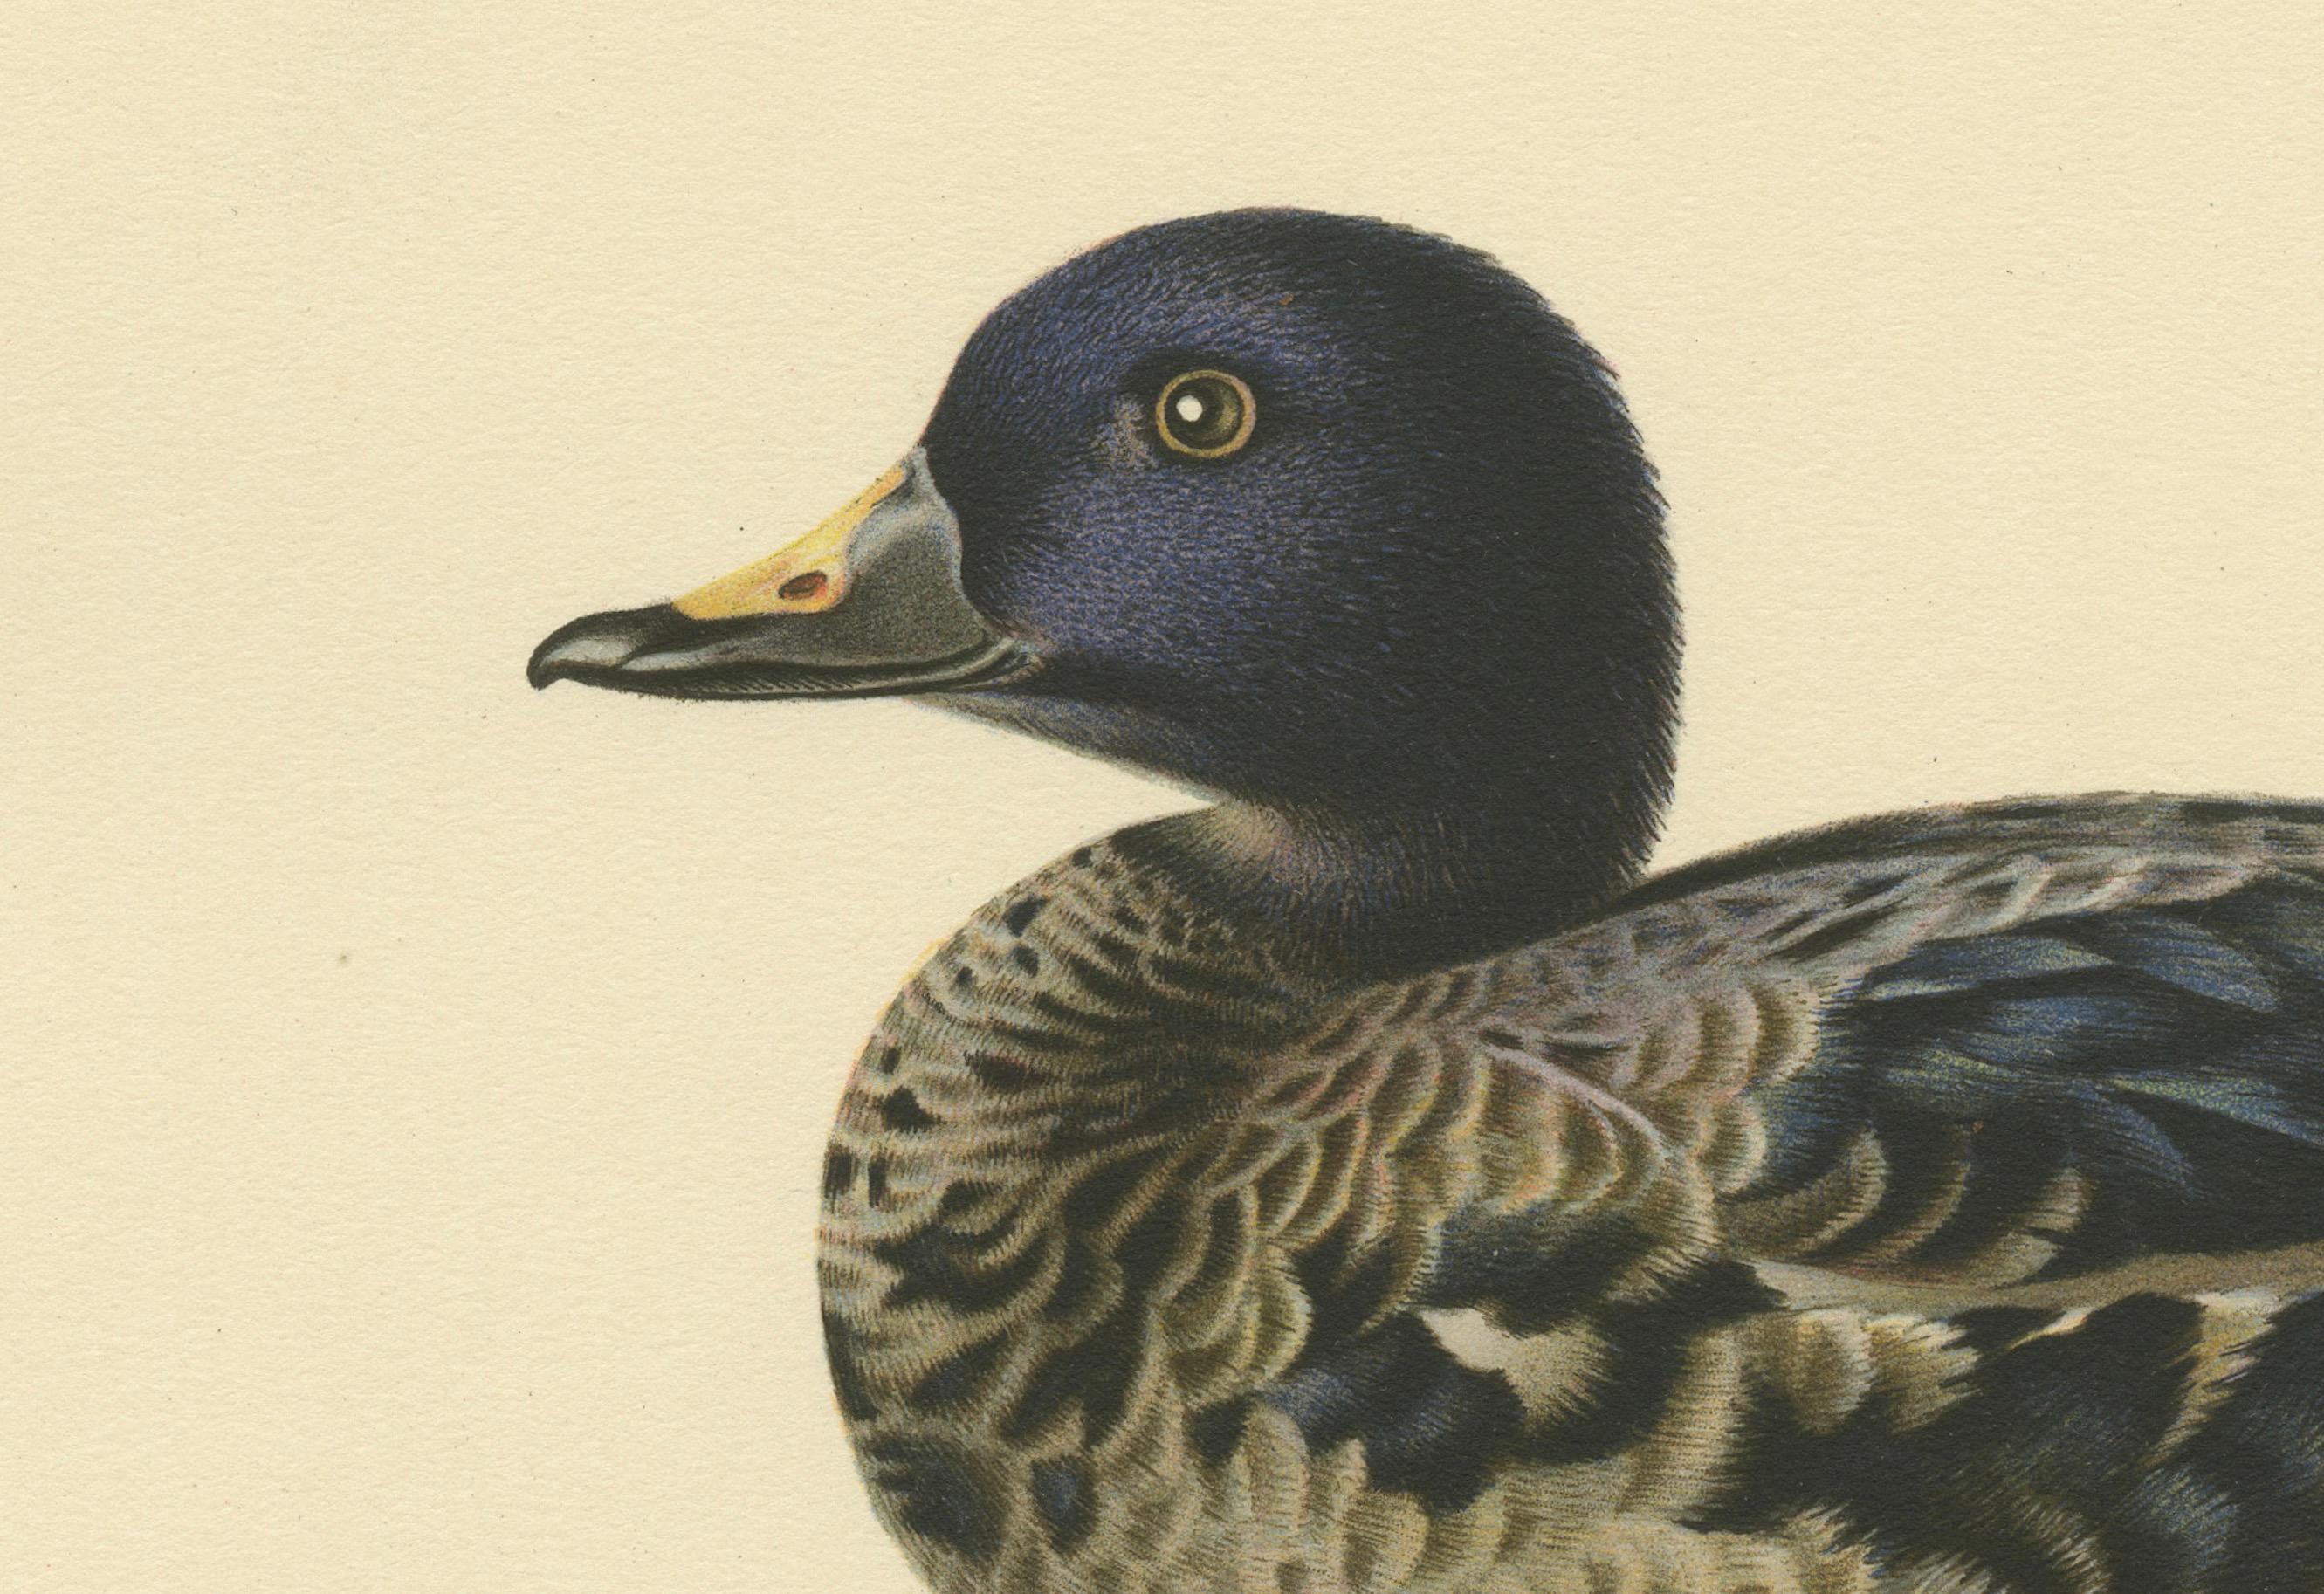 An original vintage ornithological print titled 'Oidemia Nigra', representing a juvenile Black Scoter, a species of sea duck. The illustration captures the subtle coloration and textural details of the duck's plumage with careful attention to the